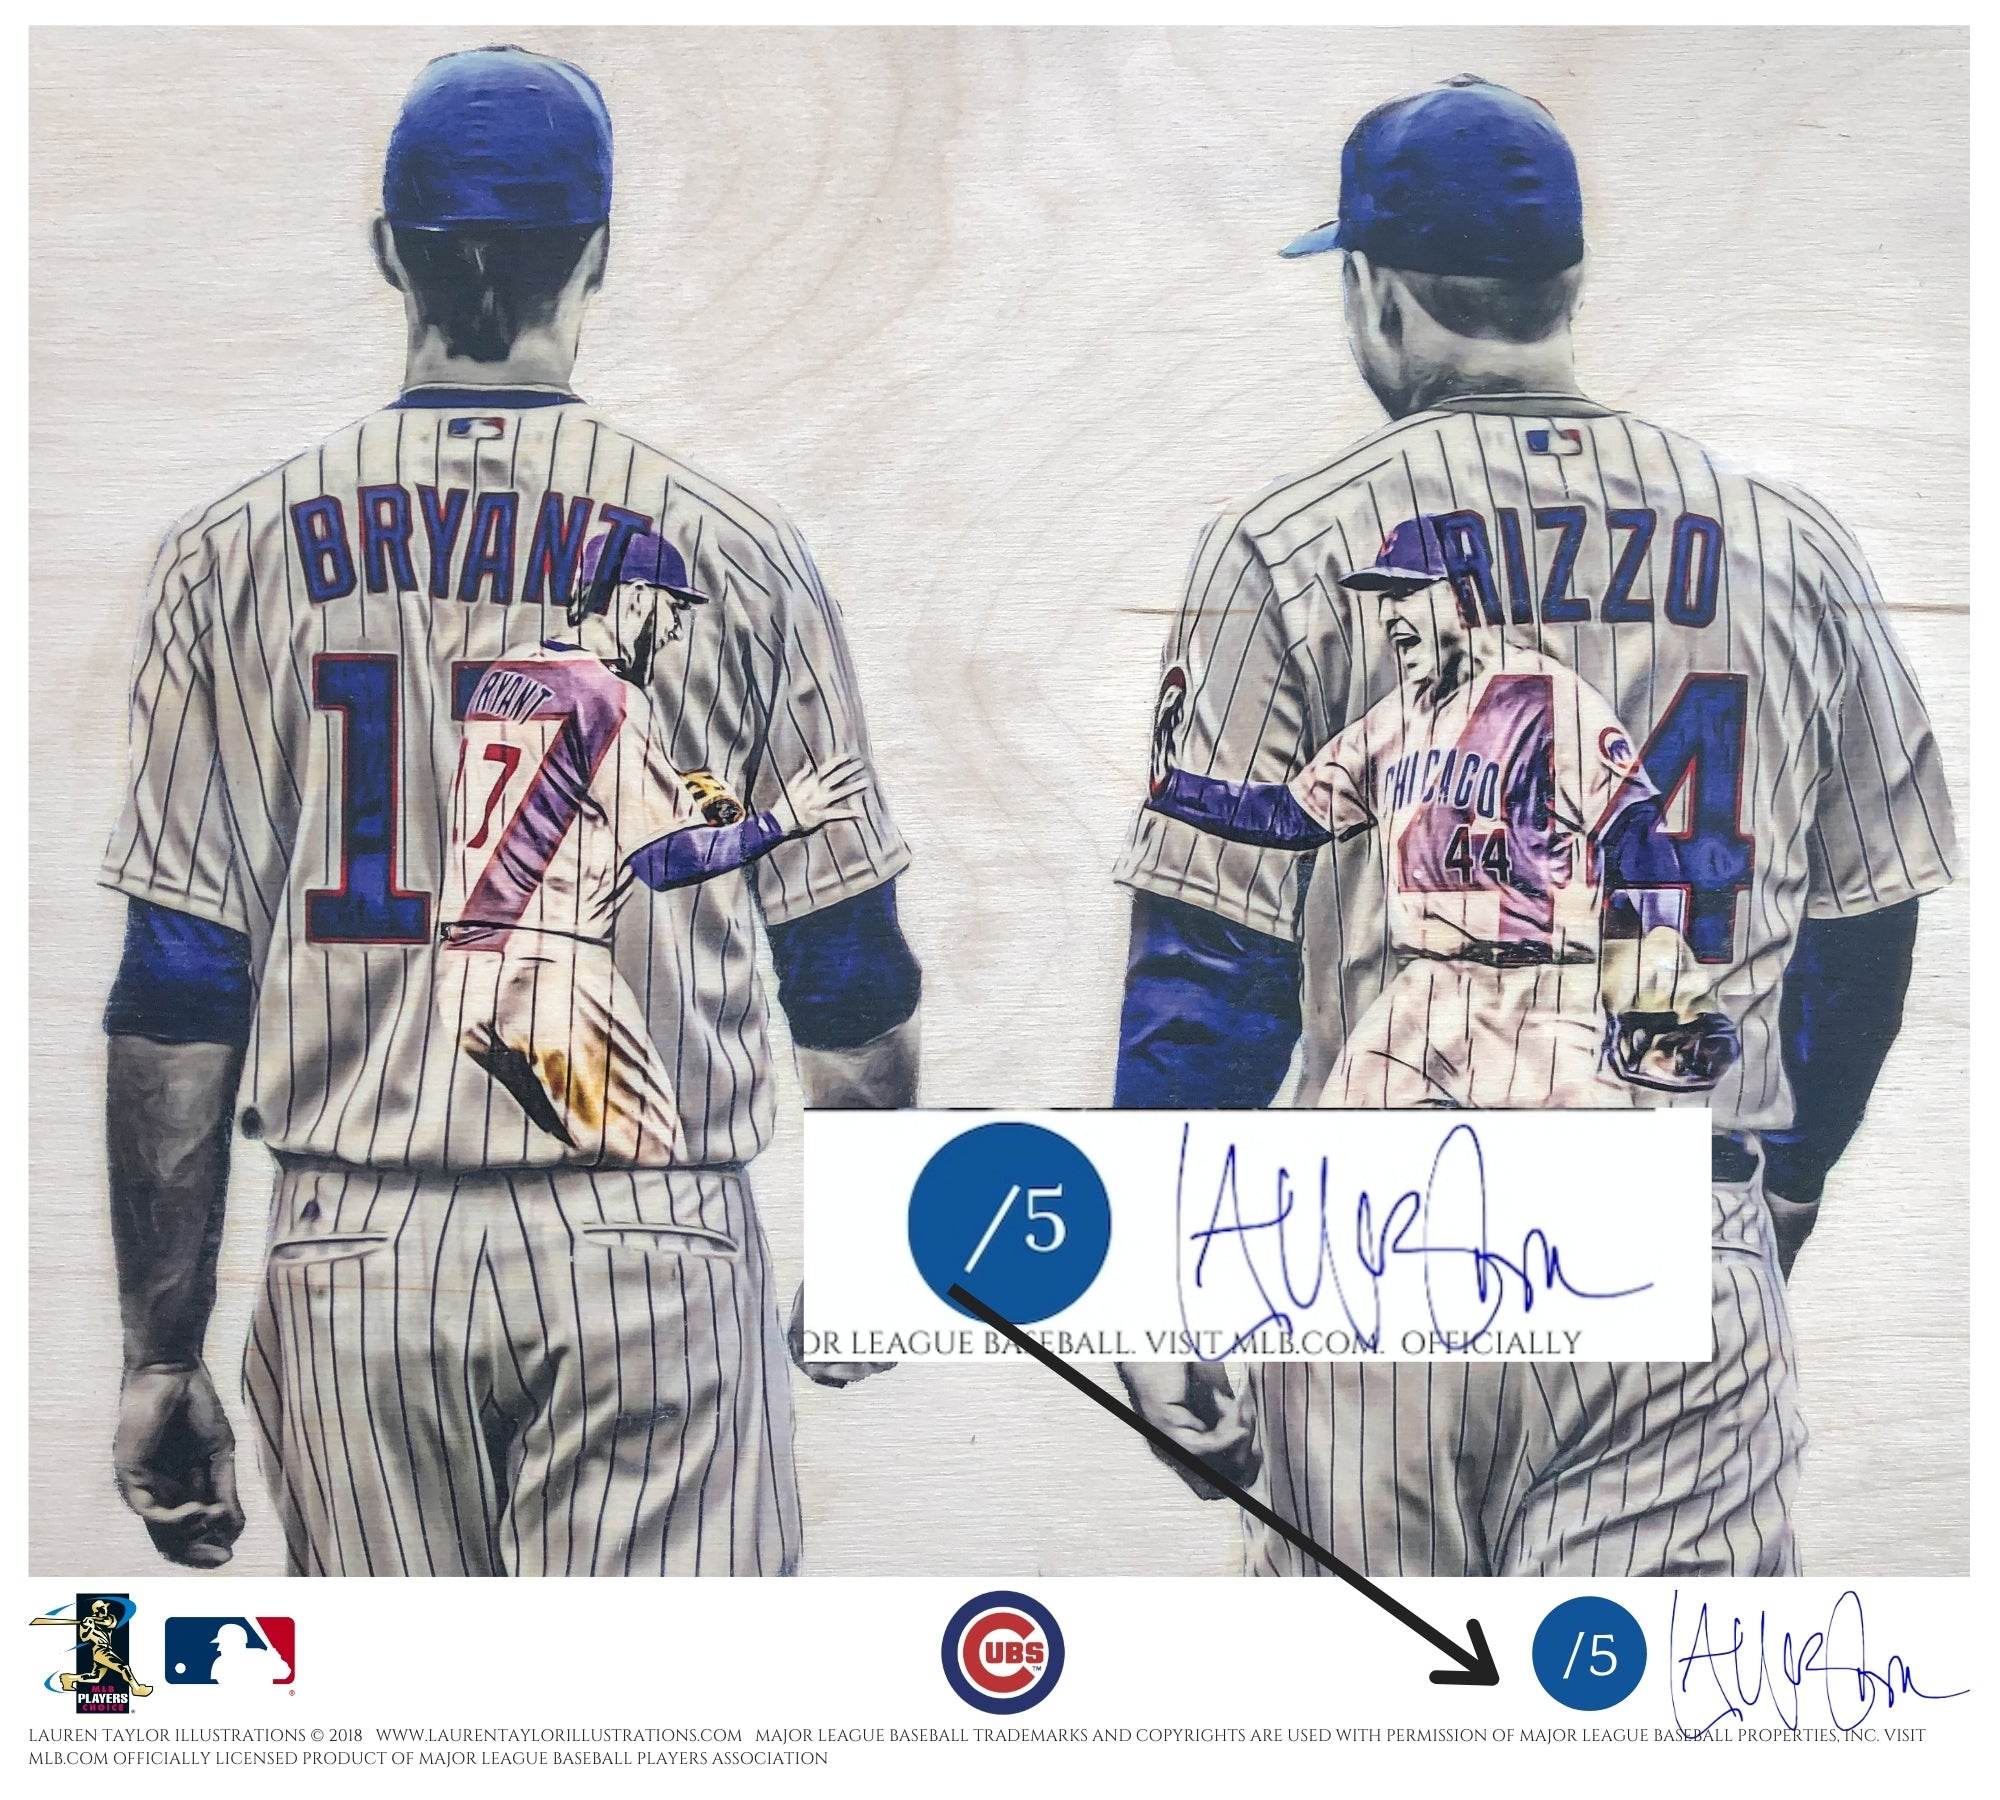 MLB Chicago Cubs - Kris Bryant 15 Wall Poster, 22.375 x 34